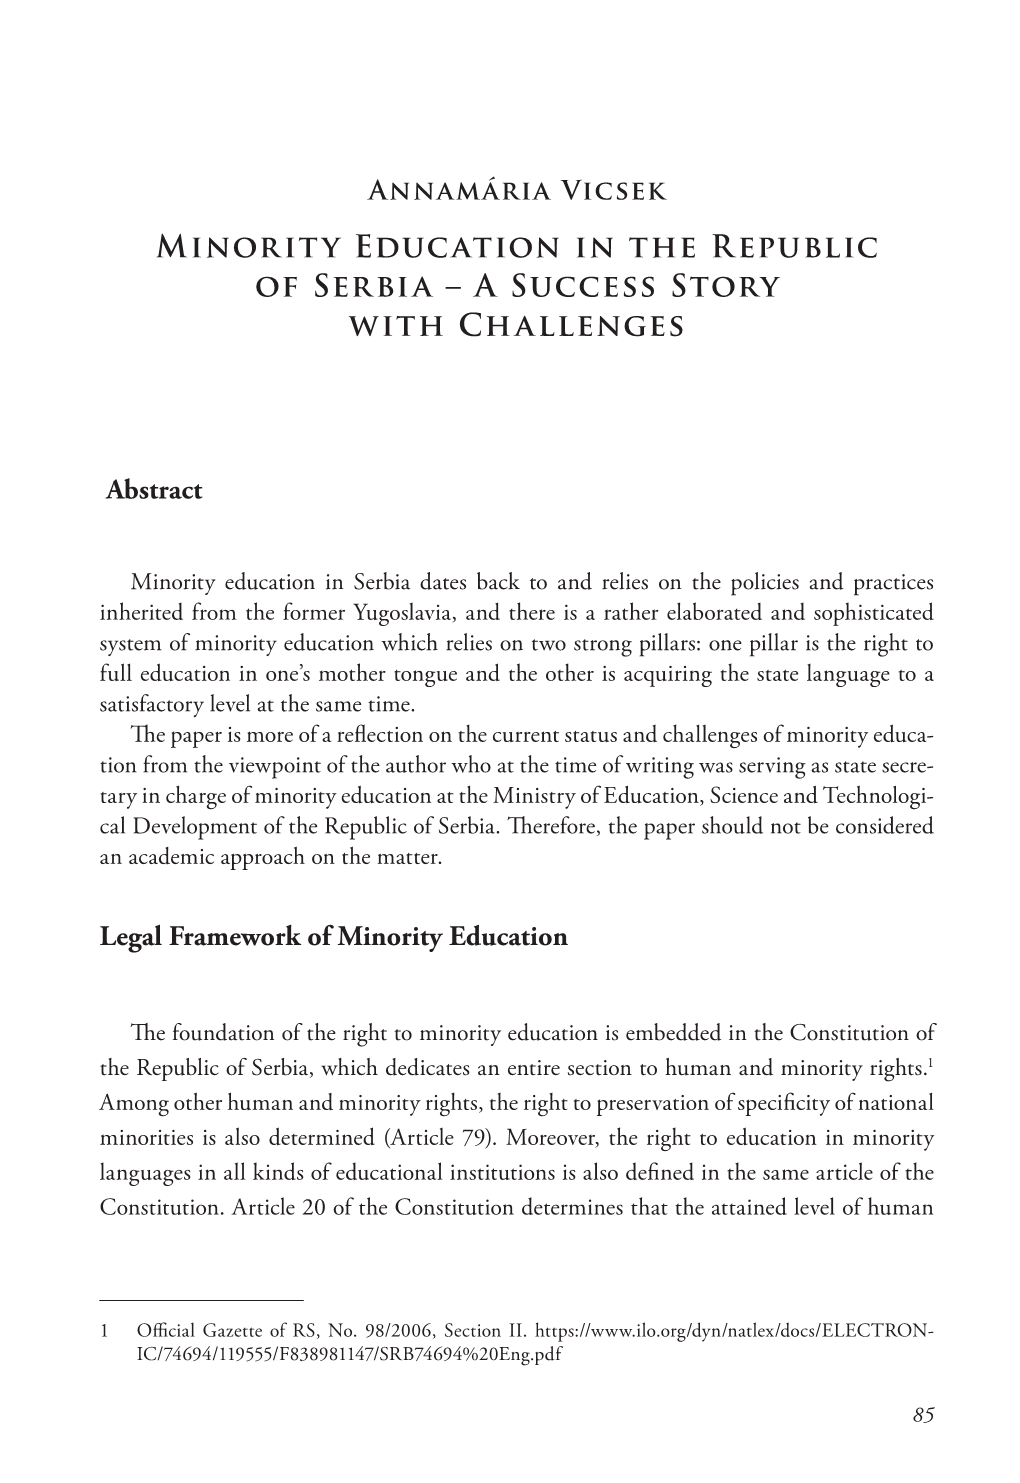 Minority Education in the Republic of Serbia – a Success Story with Challenges